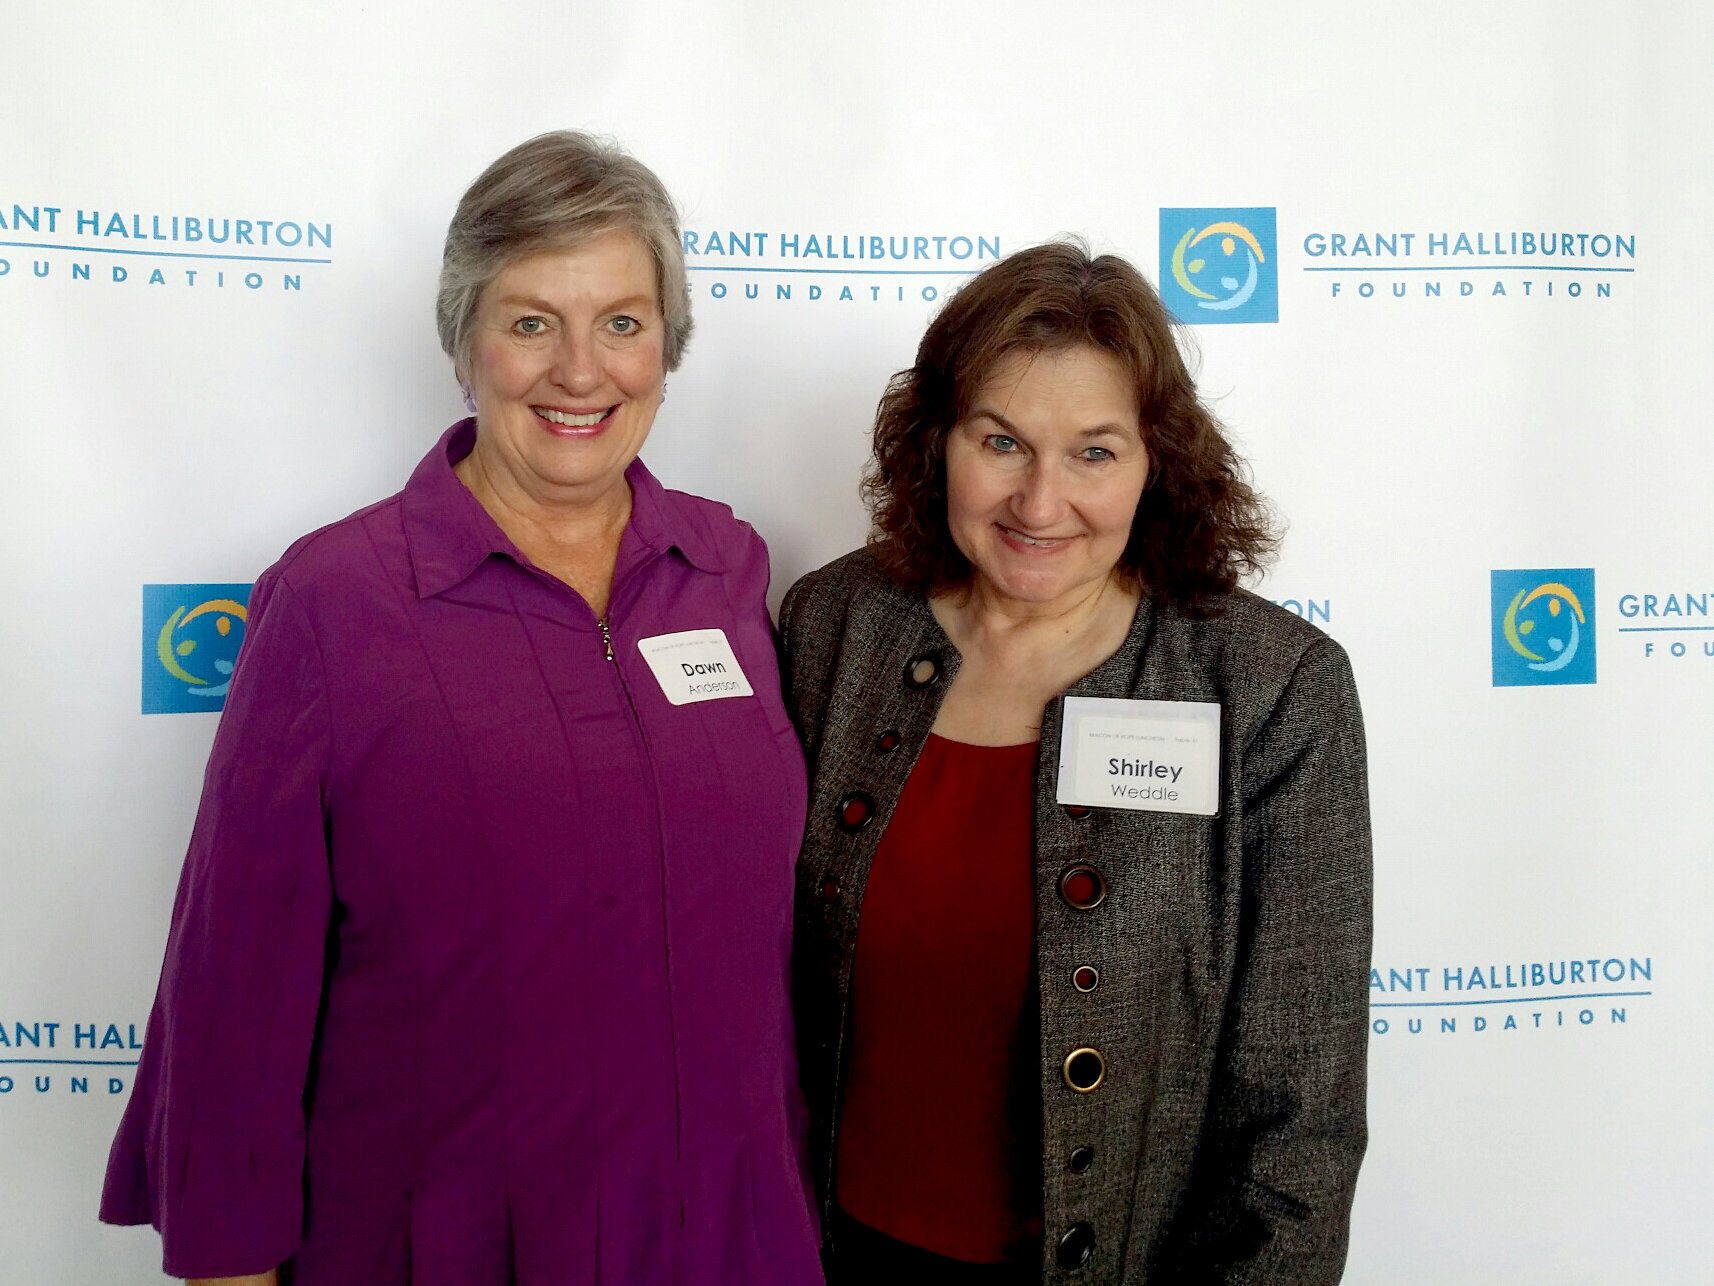 Dawn Anderson with Shirley Weddle at a Grant Halliburton Foundation event in early 2020.